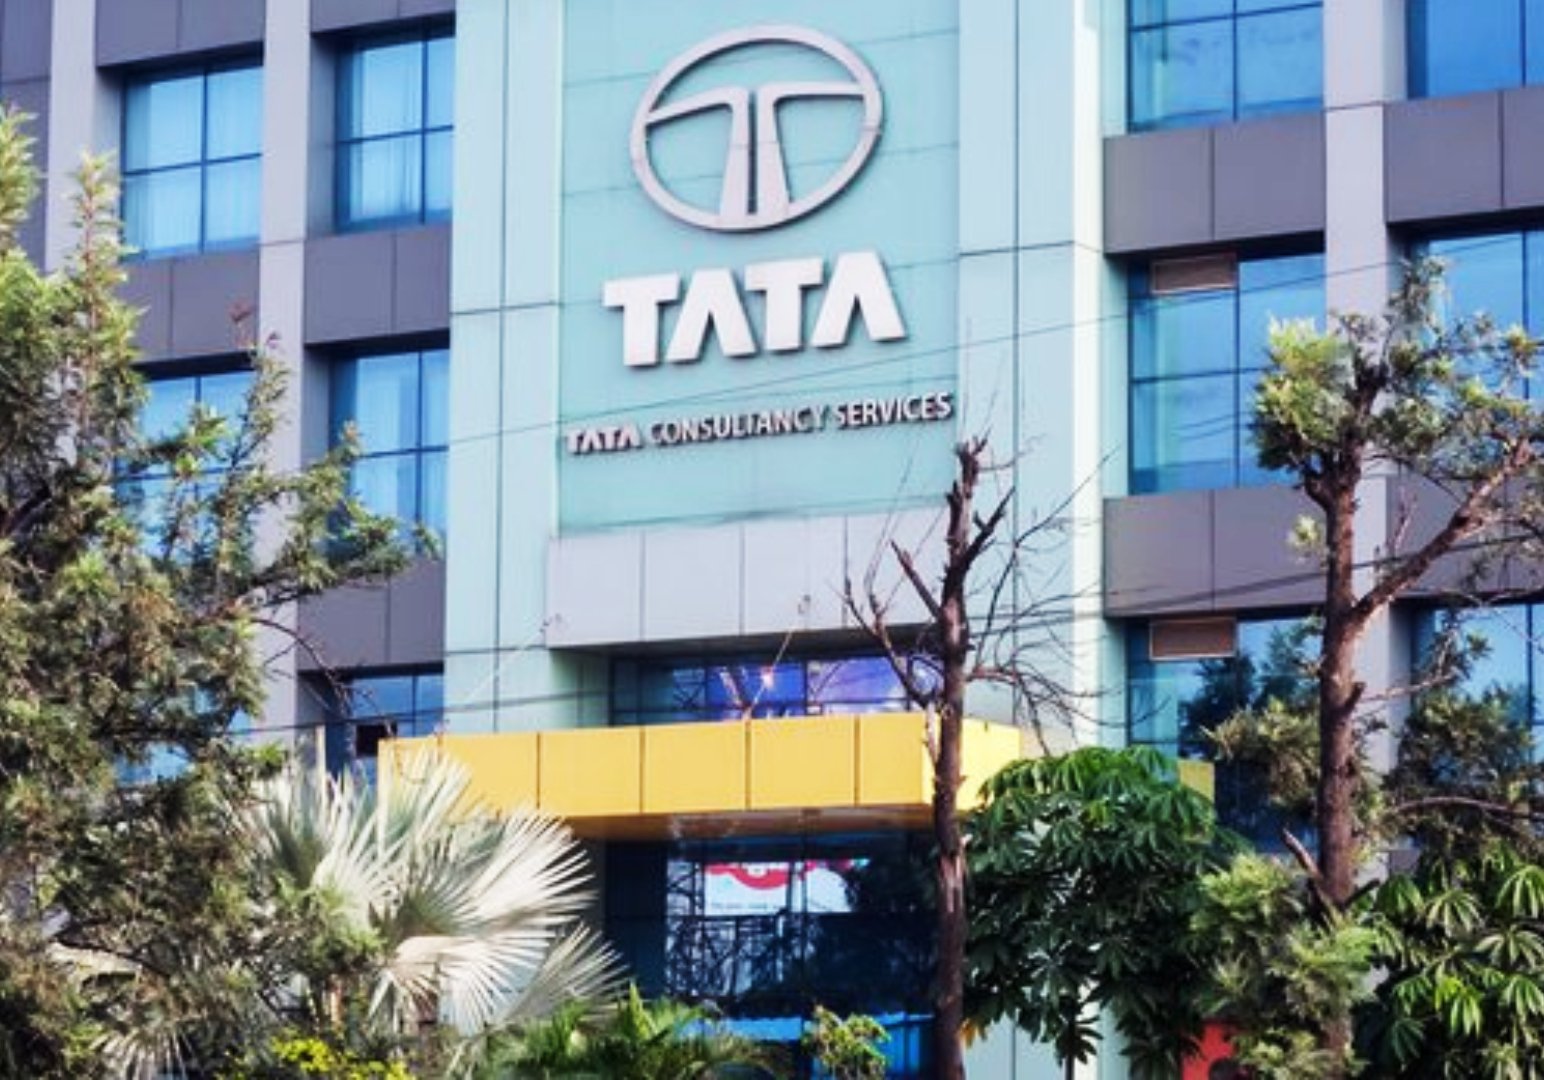 IT Giant TCS RollsOut Salary Increments From Oct Hires 16000 Employees